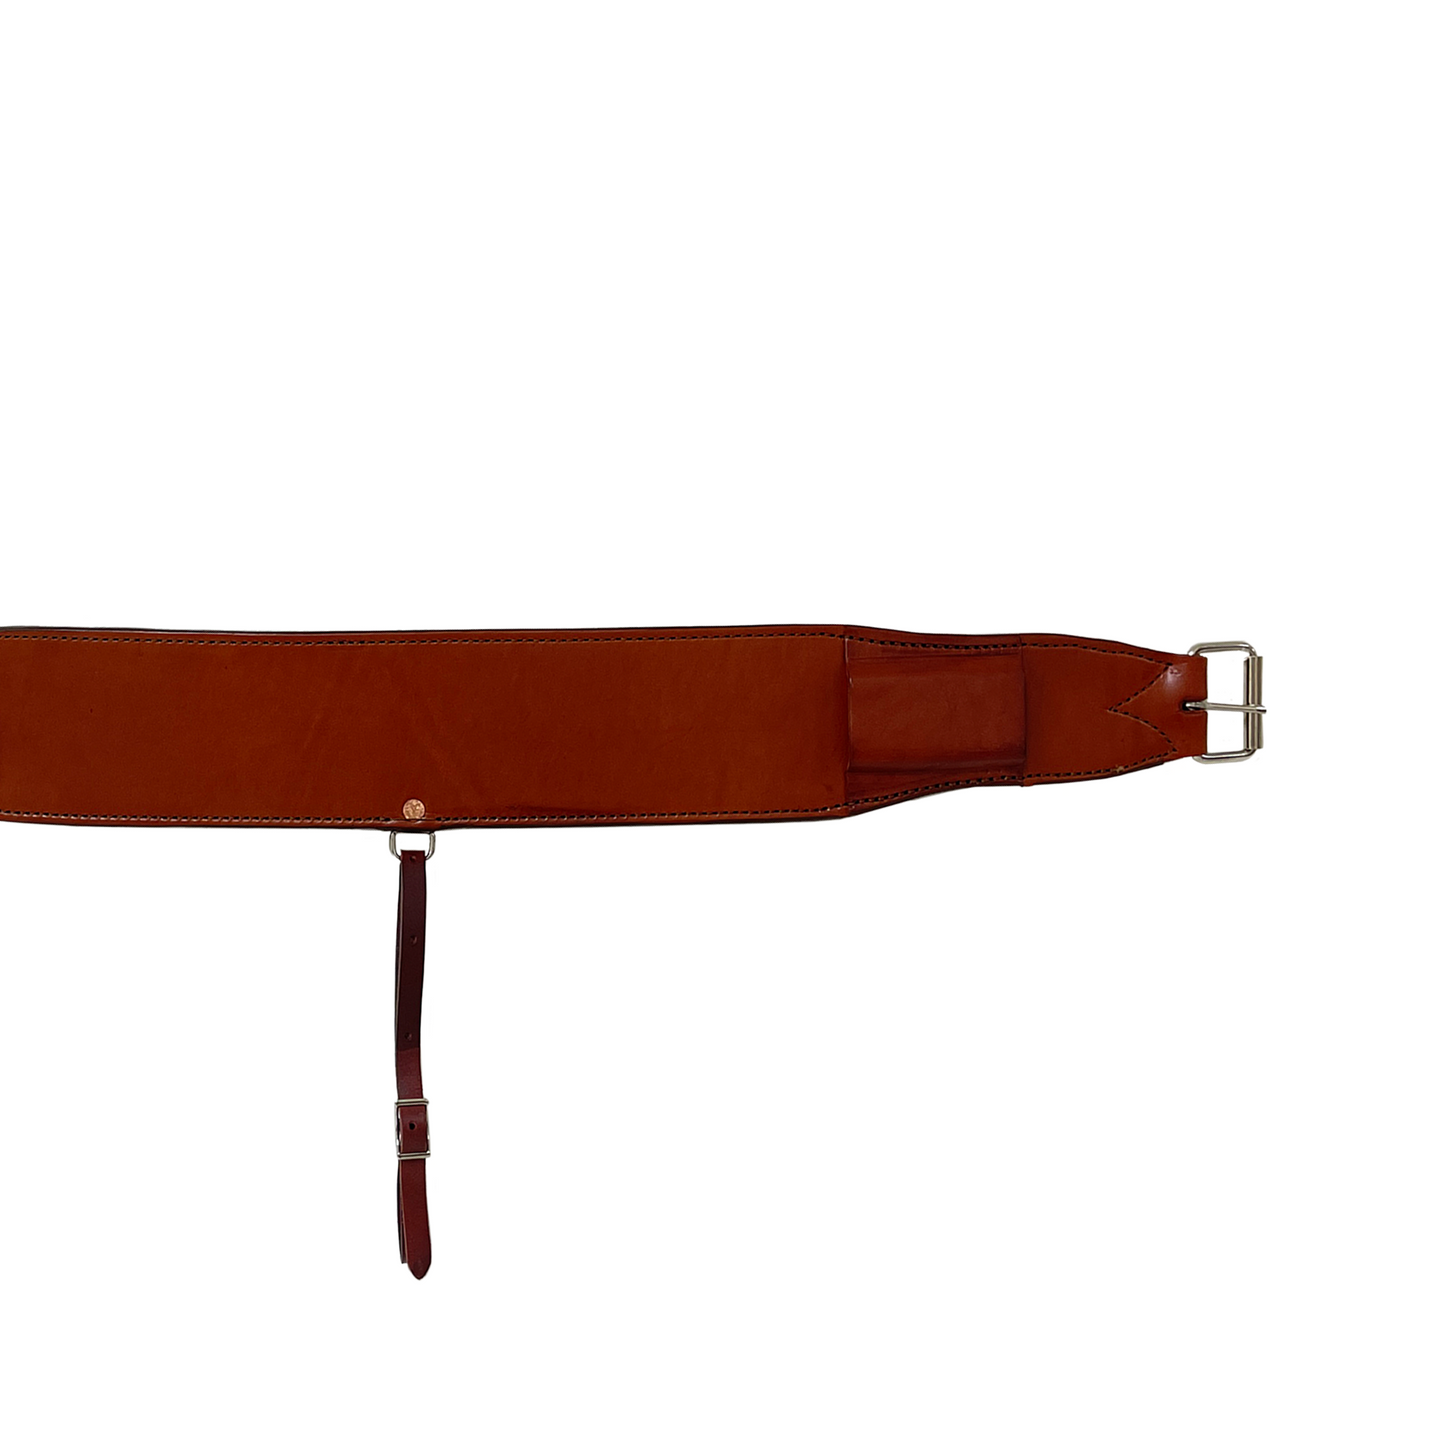 182-T 33" x 4-1/2" Back flank toast leather